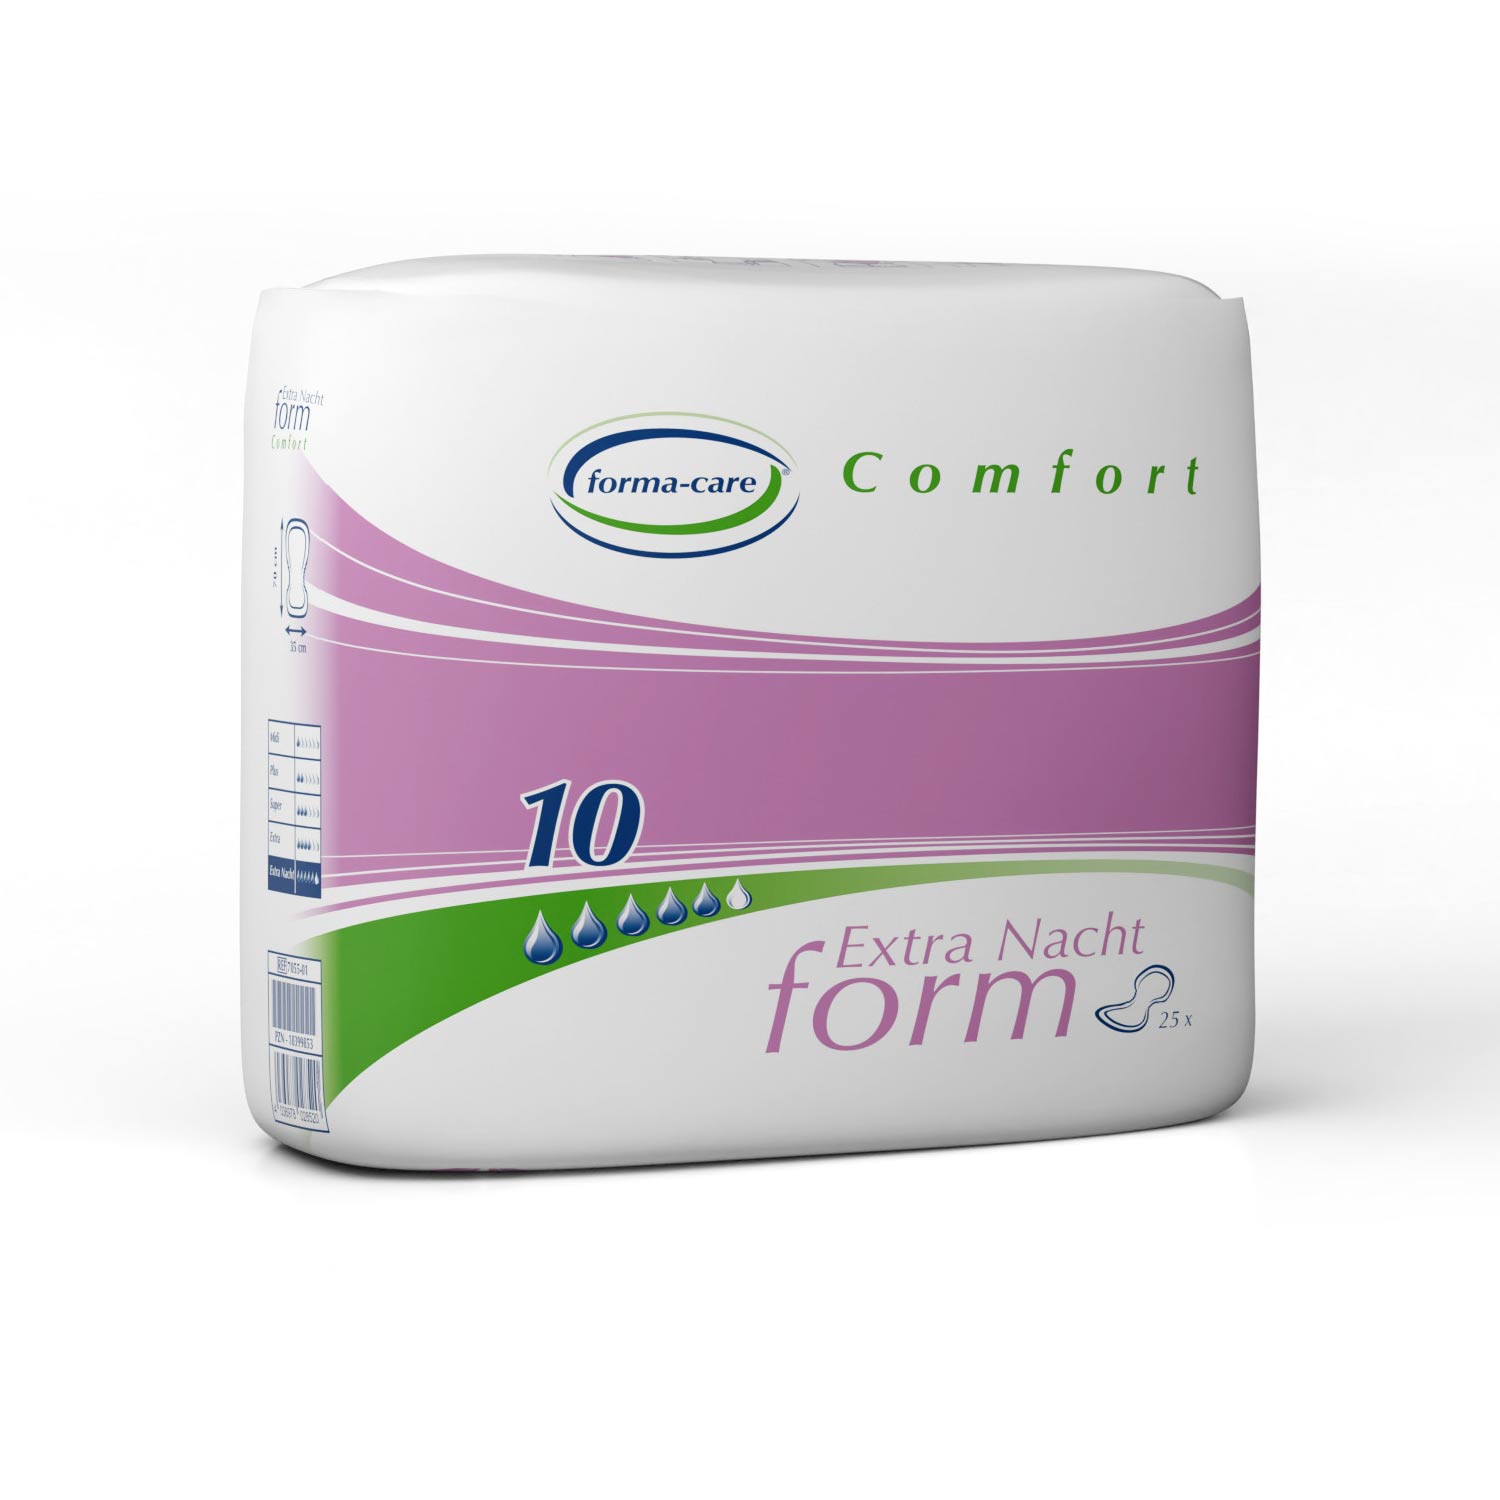 forma-care Comfort form extra Nacht (125 Stk.)